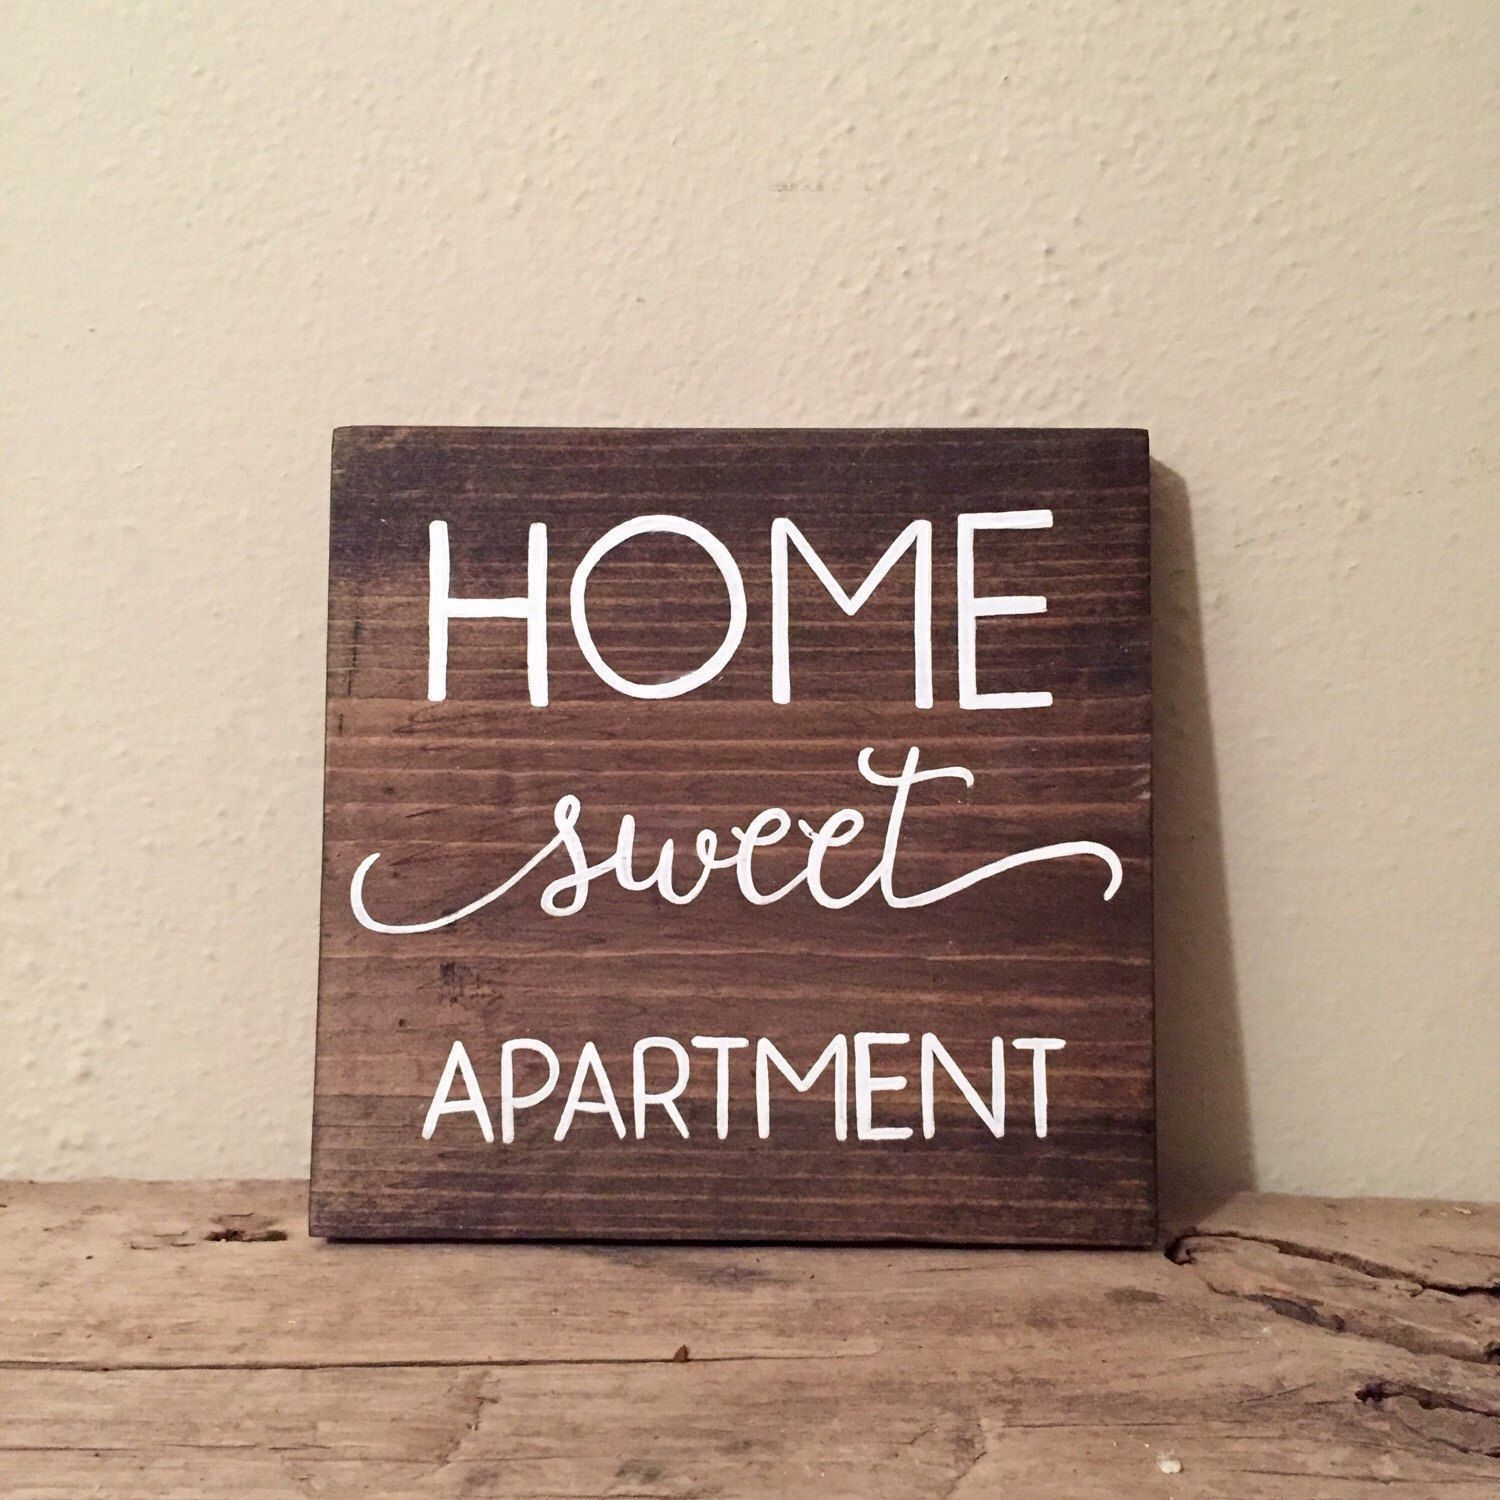 Home Sweet Apartment Wood Sign | Apartment Decor | College Student Gift - Home Sweet Apartment Wood Sign | Apartment Decor | College Student Gift -   19 diy Decorations college ideas